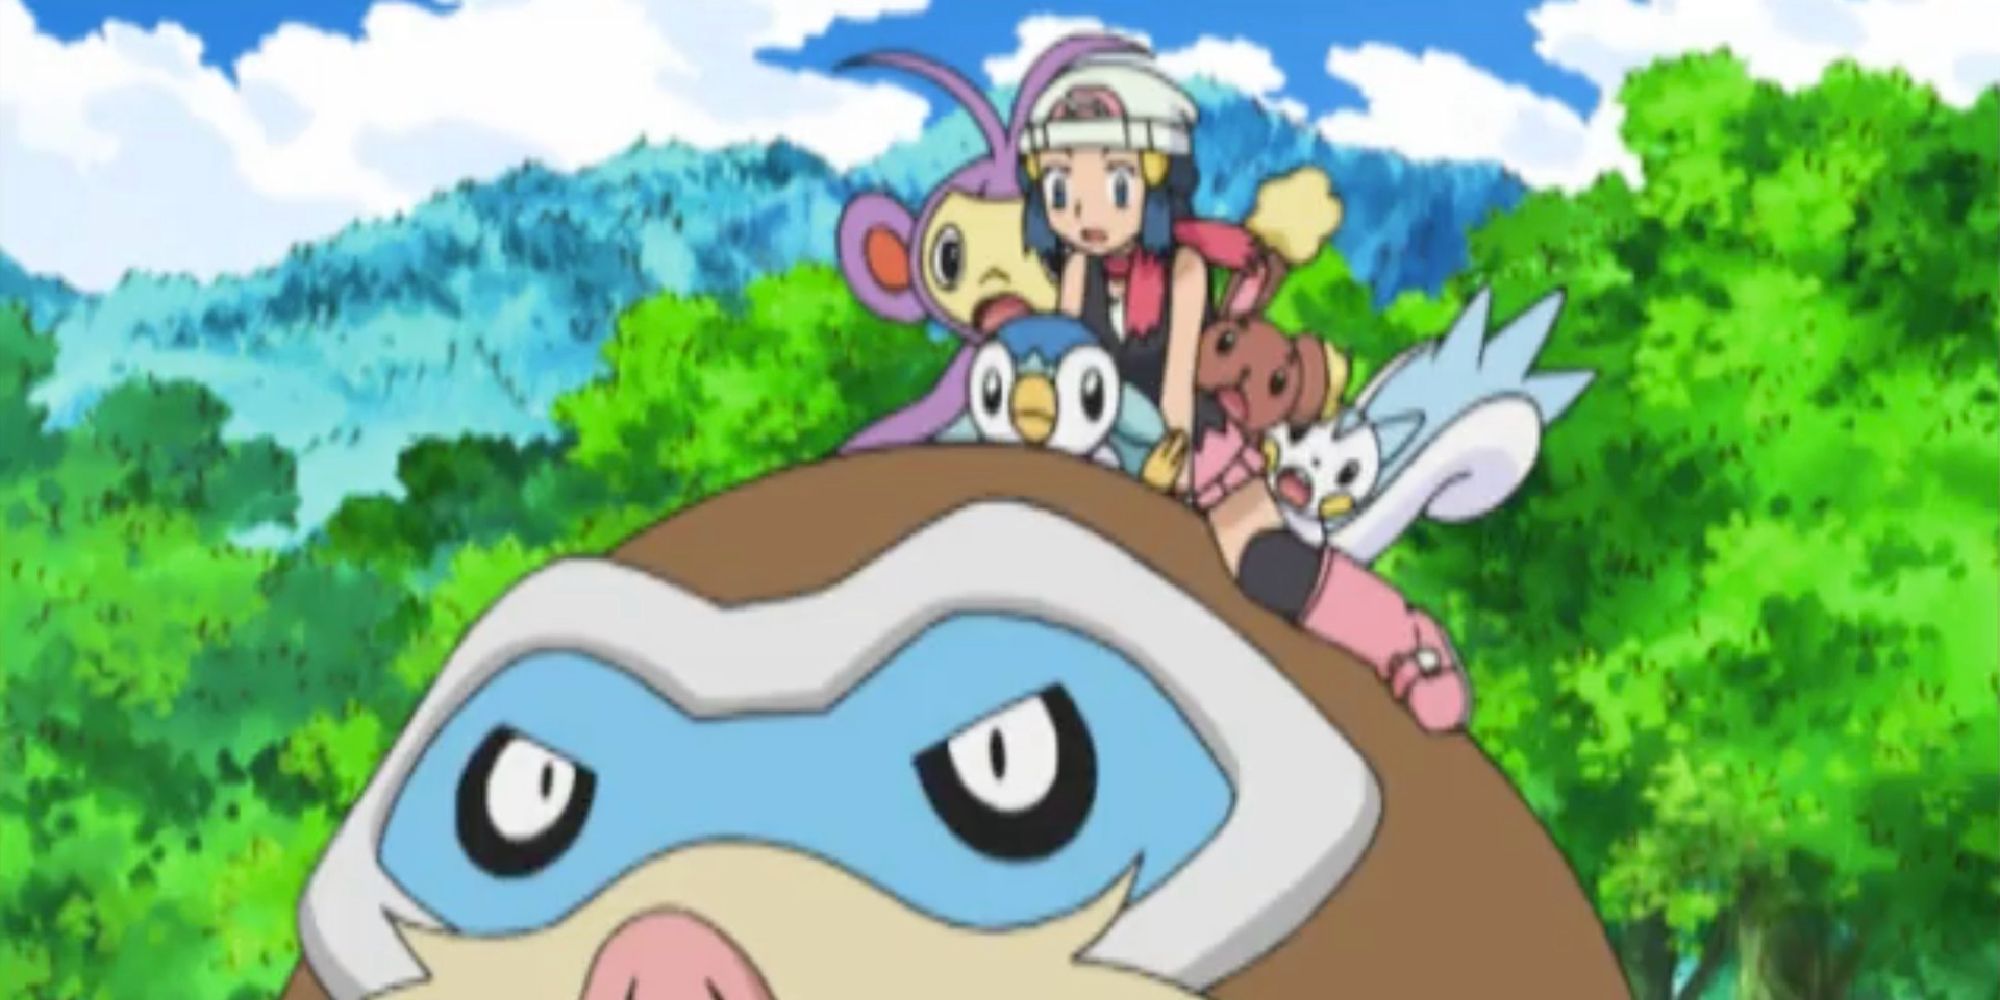 Dawn, Piplup, Ambipom, Buneary, and Pachirisu riding on Mamoswine in a forest